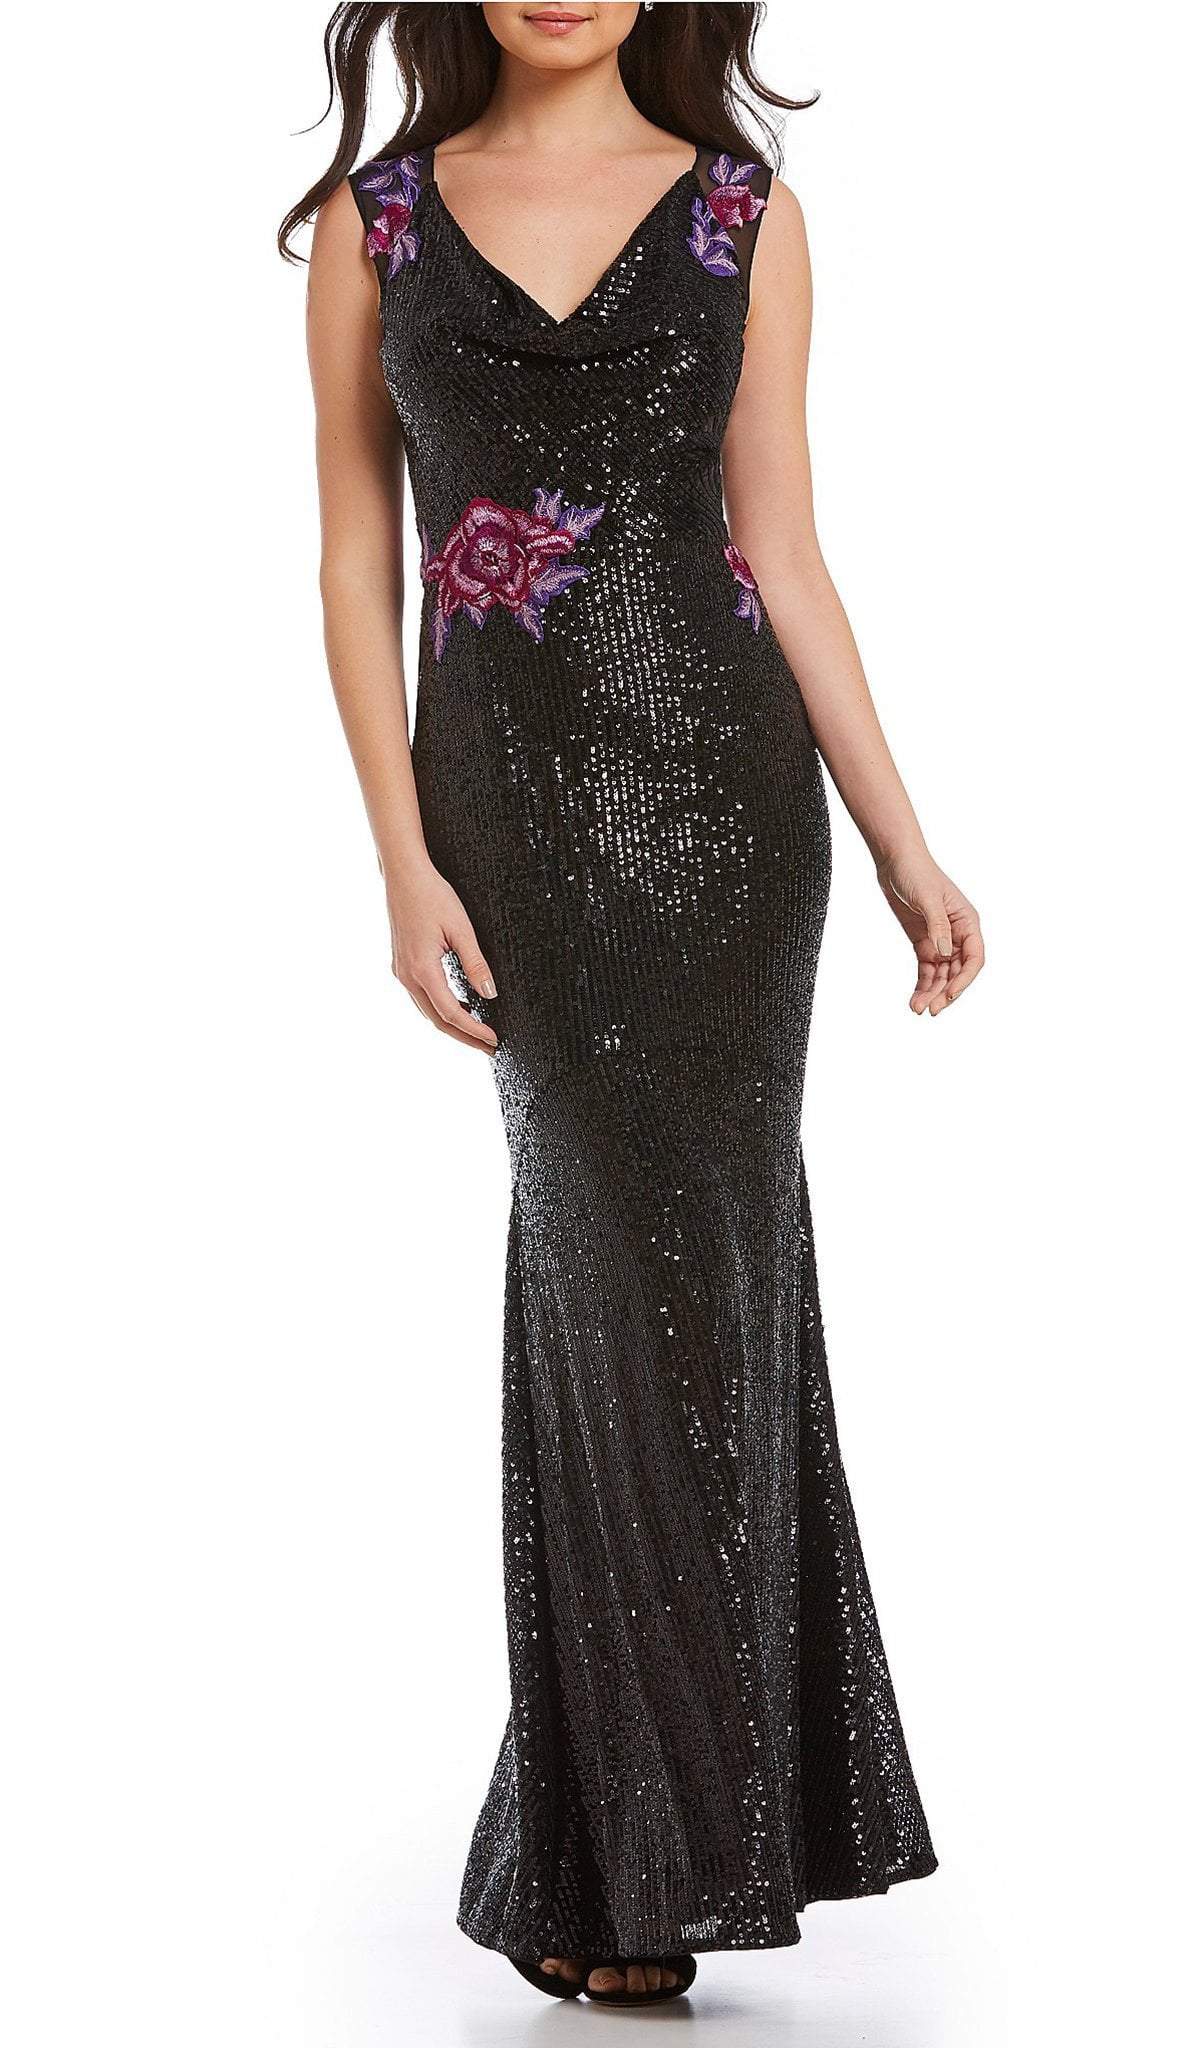 Image of Aidan Mattox - MD1E201740 Floral Embellished V-Neck Sheath Gown